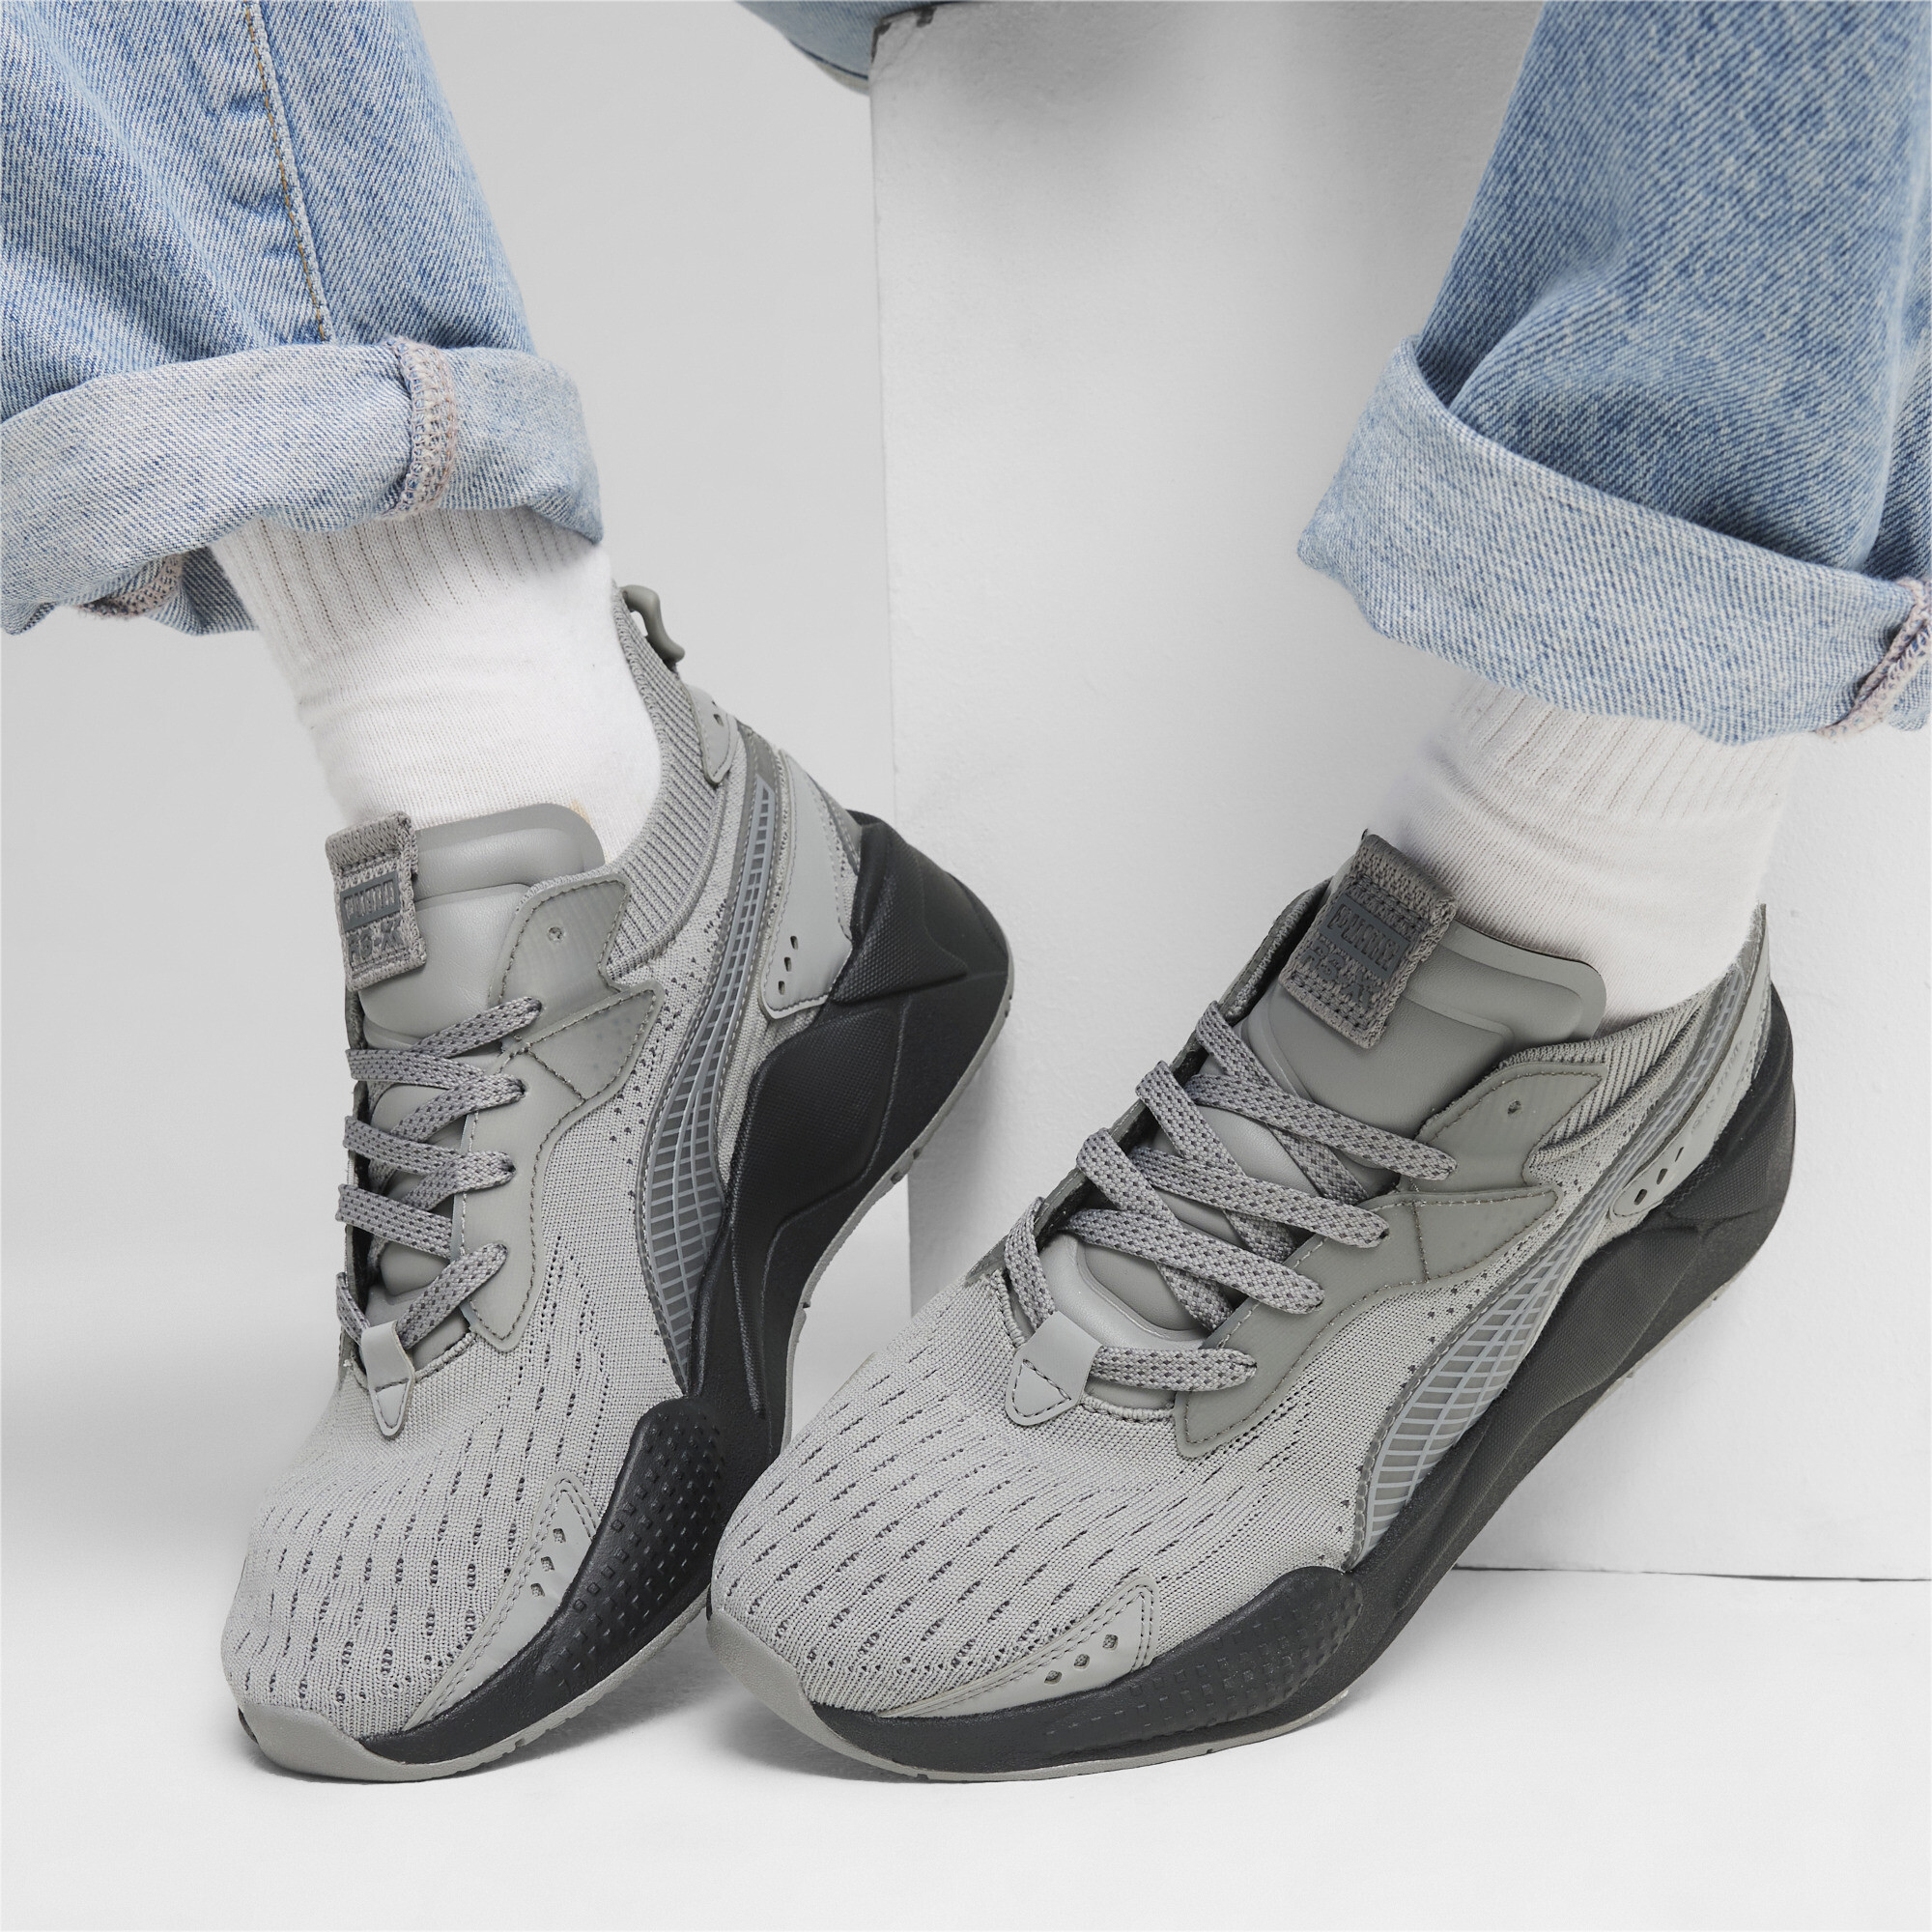 Puma RS-XK REMIX Sneakers, Gray, Size 35.5, Shoes